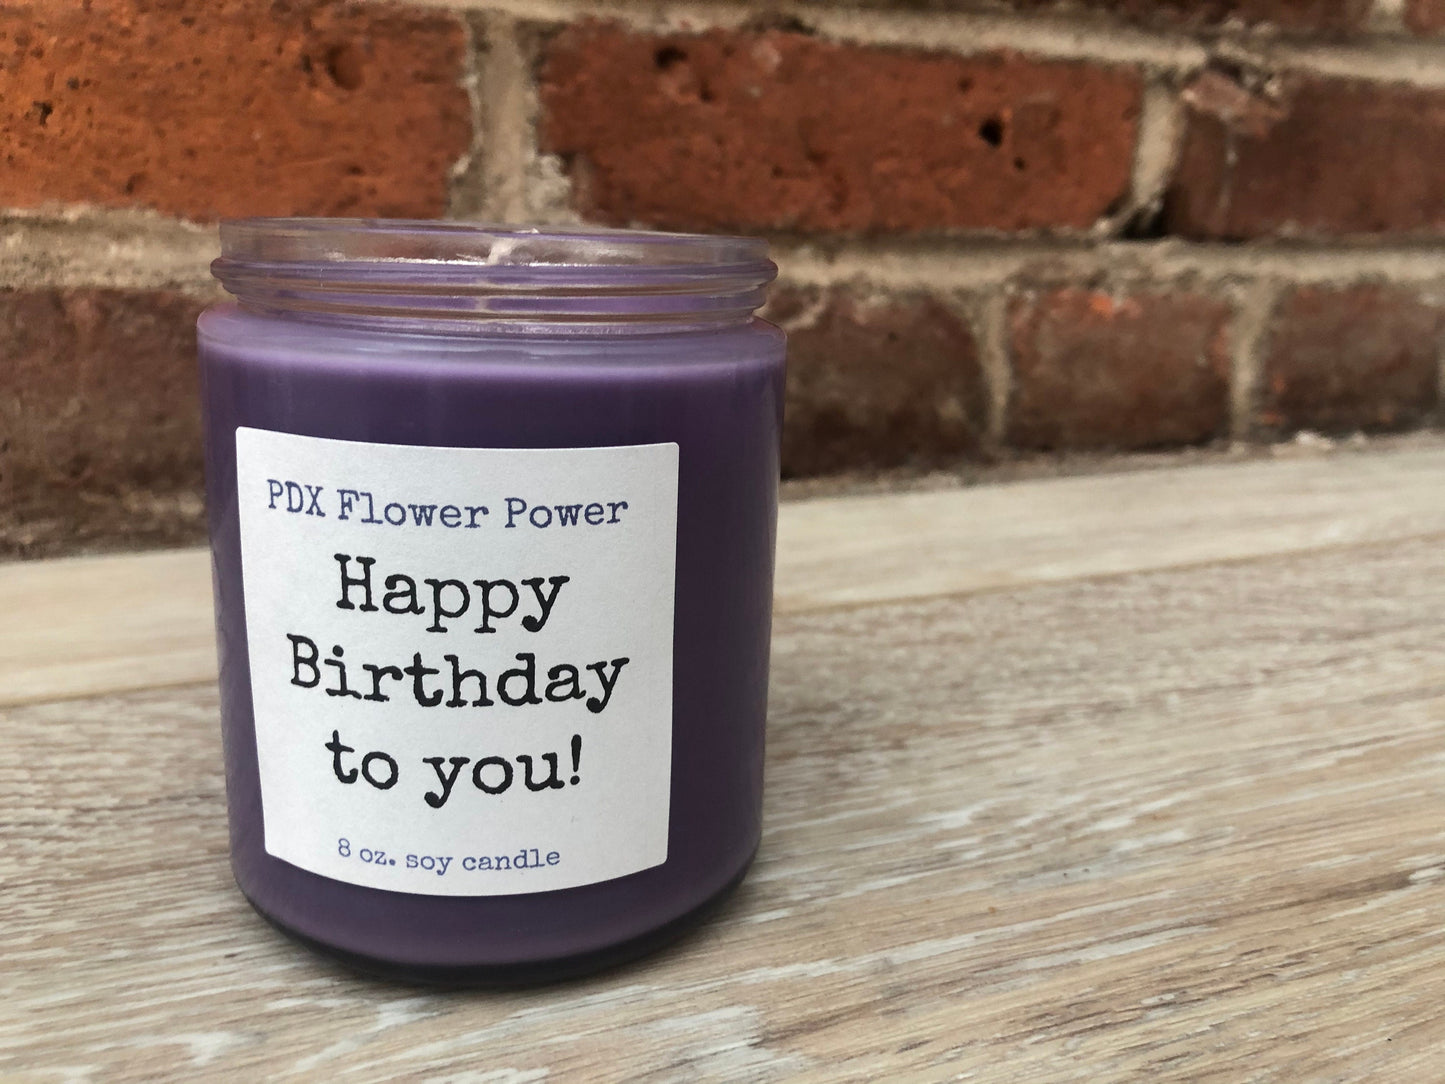 PDX Flower Power "Happy Birthday" handcrafted soy candle